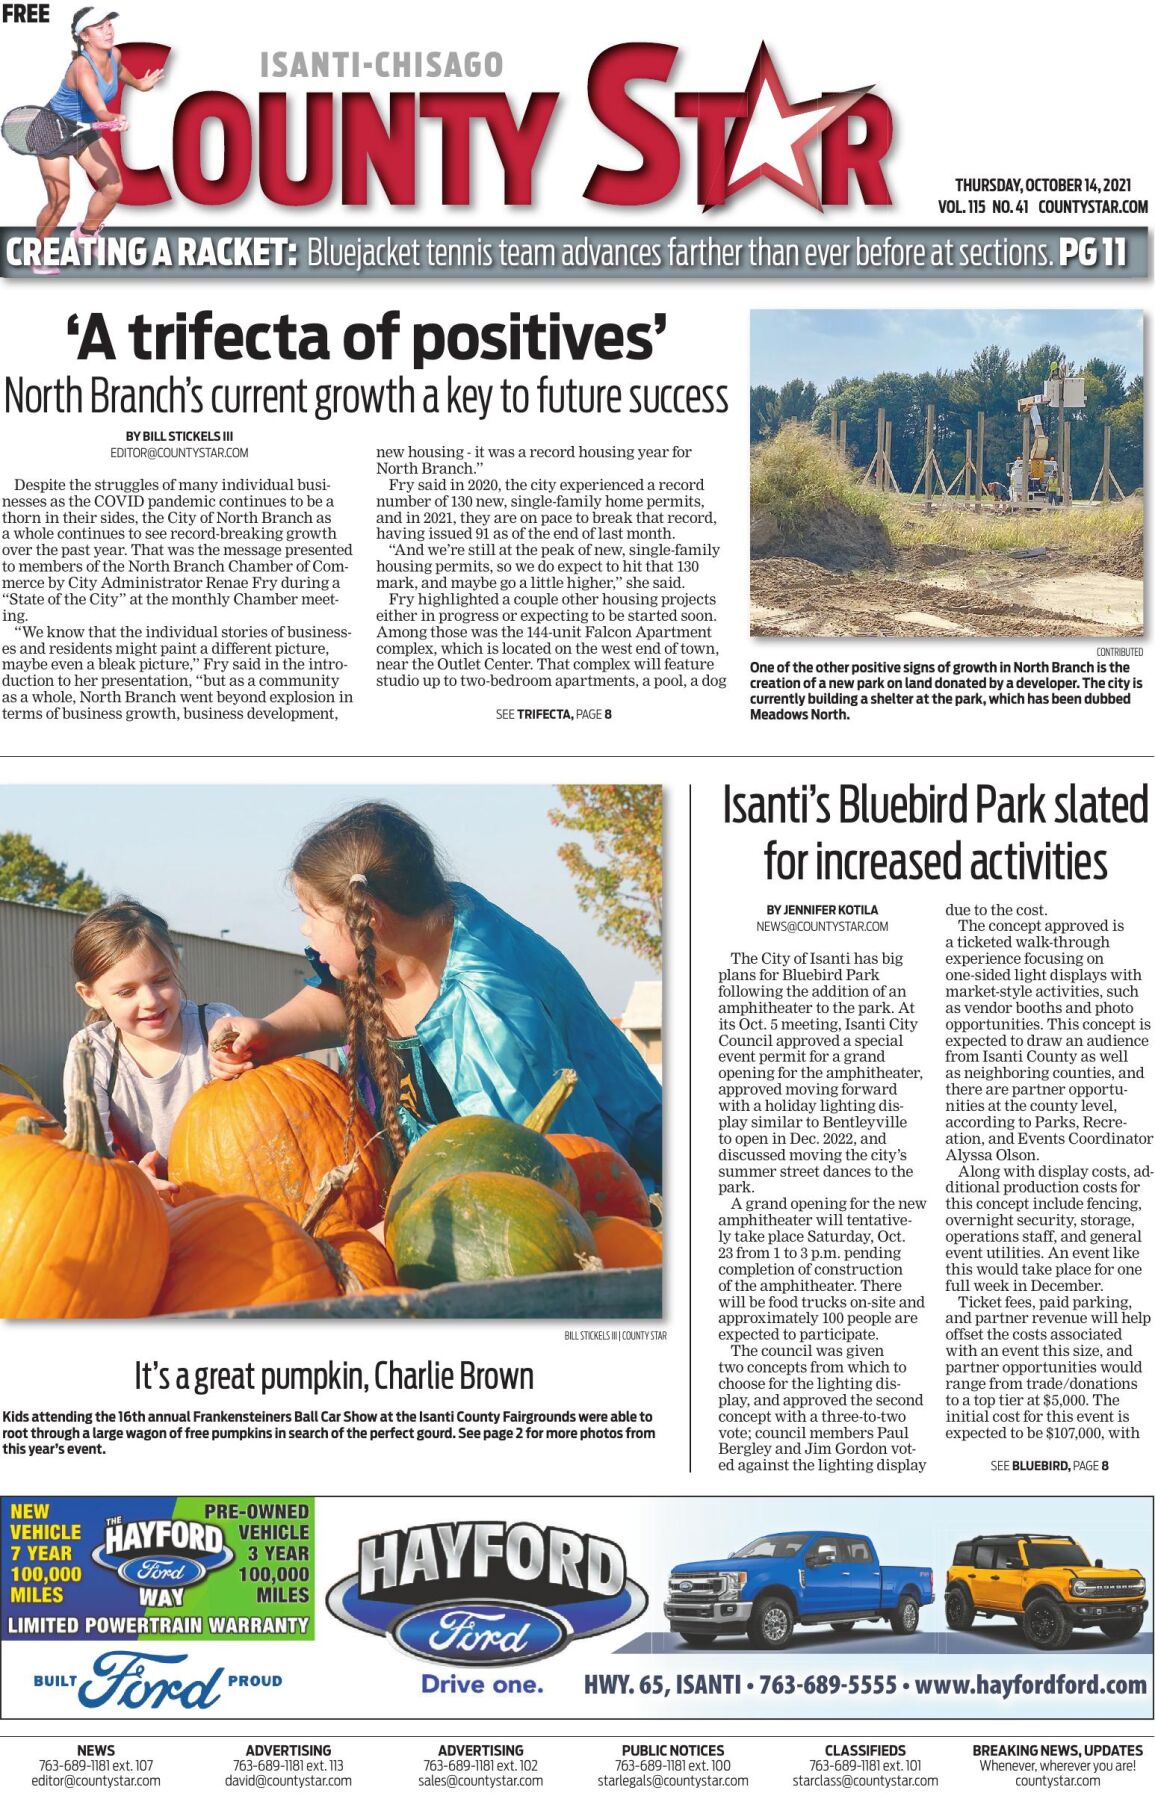 Isanti-Chisago County Star October 14, 2021 e-edition